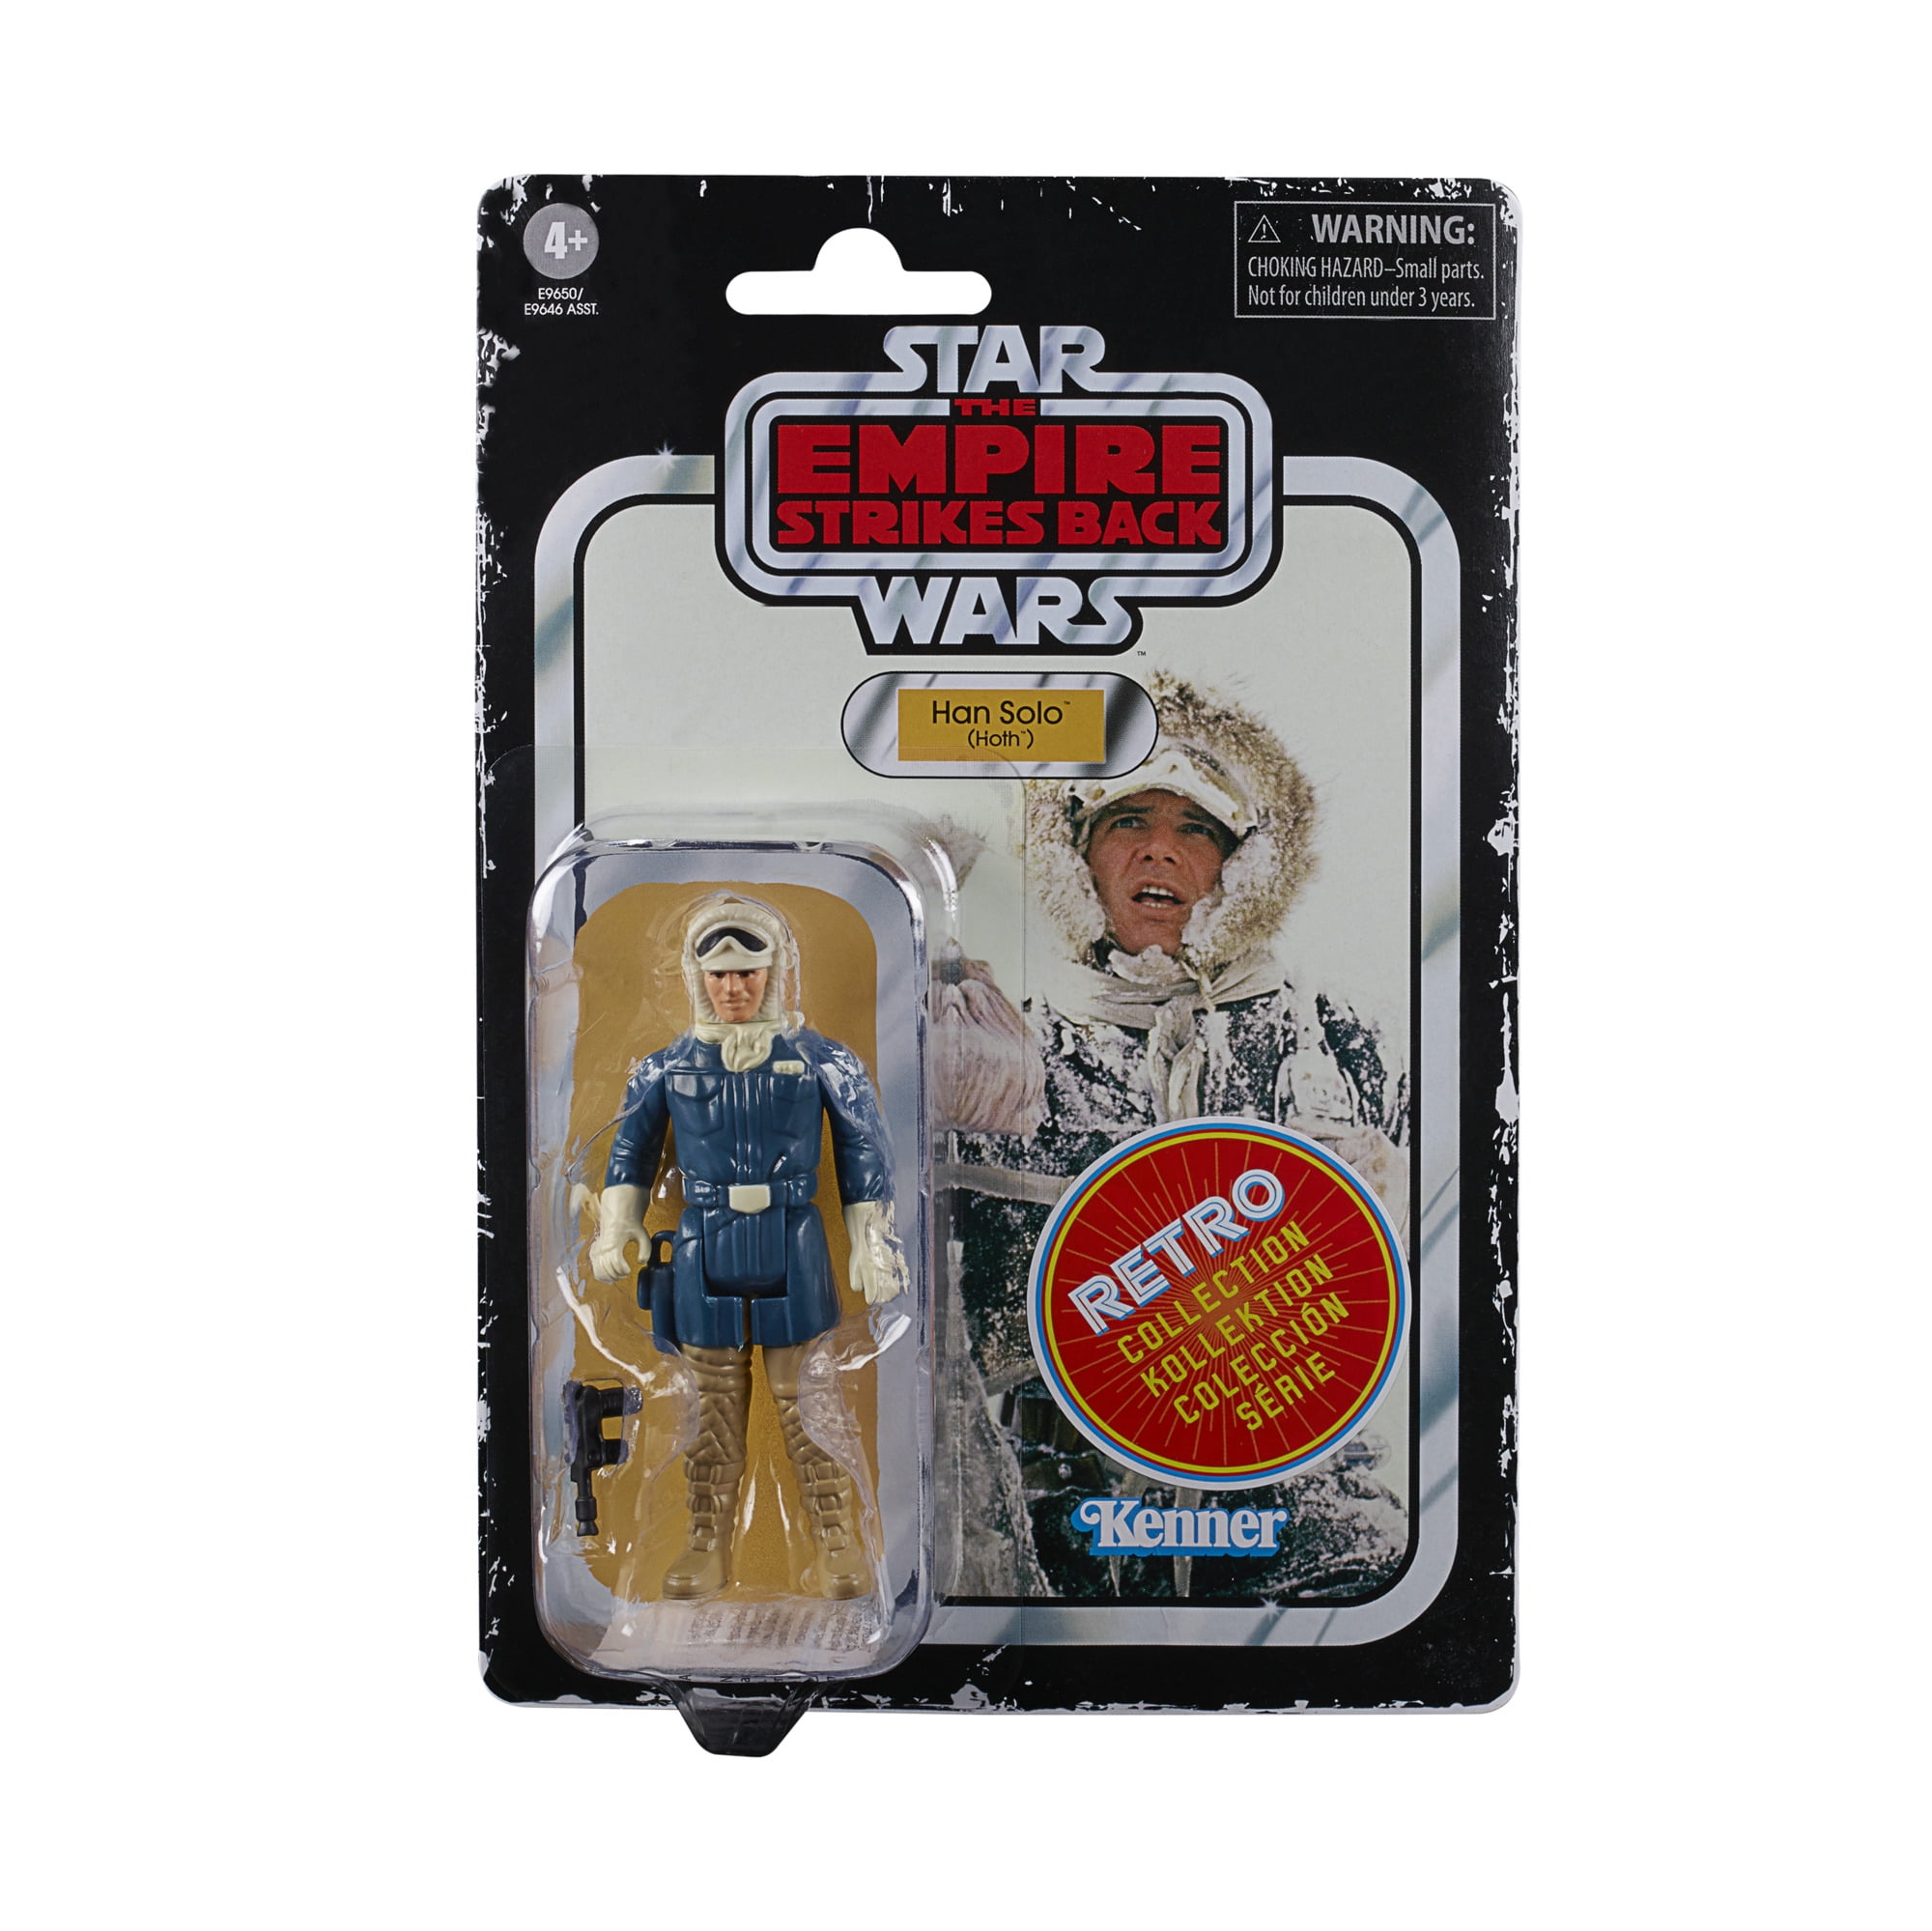 STAR WARS The Empire Strikes Back Retro Collection 3.75" Action Figure BRAND NEW 